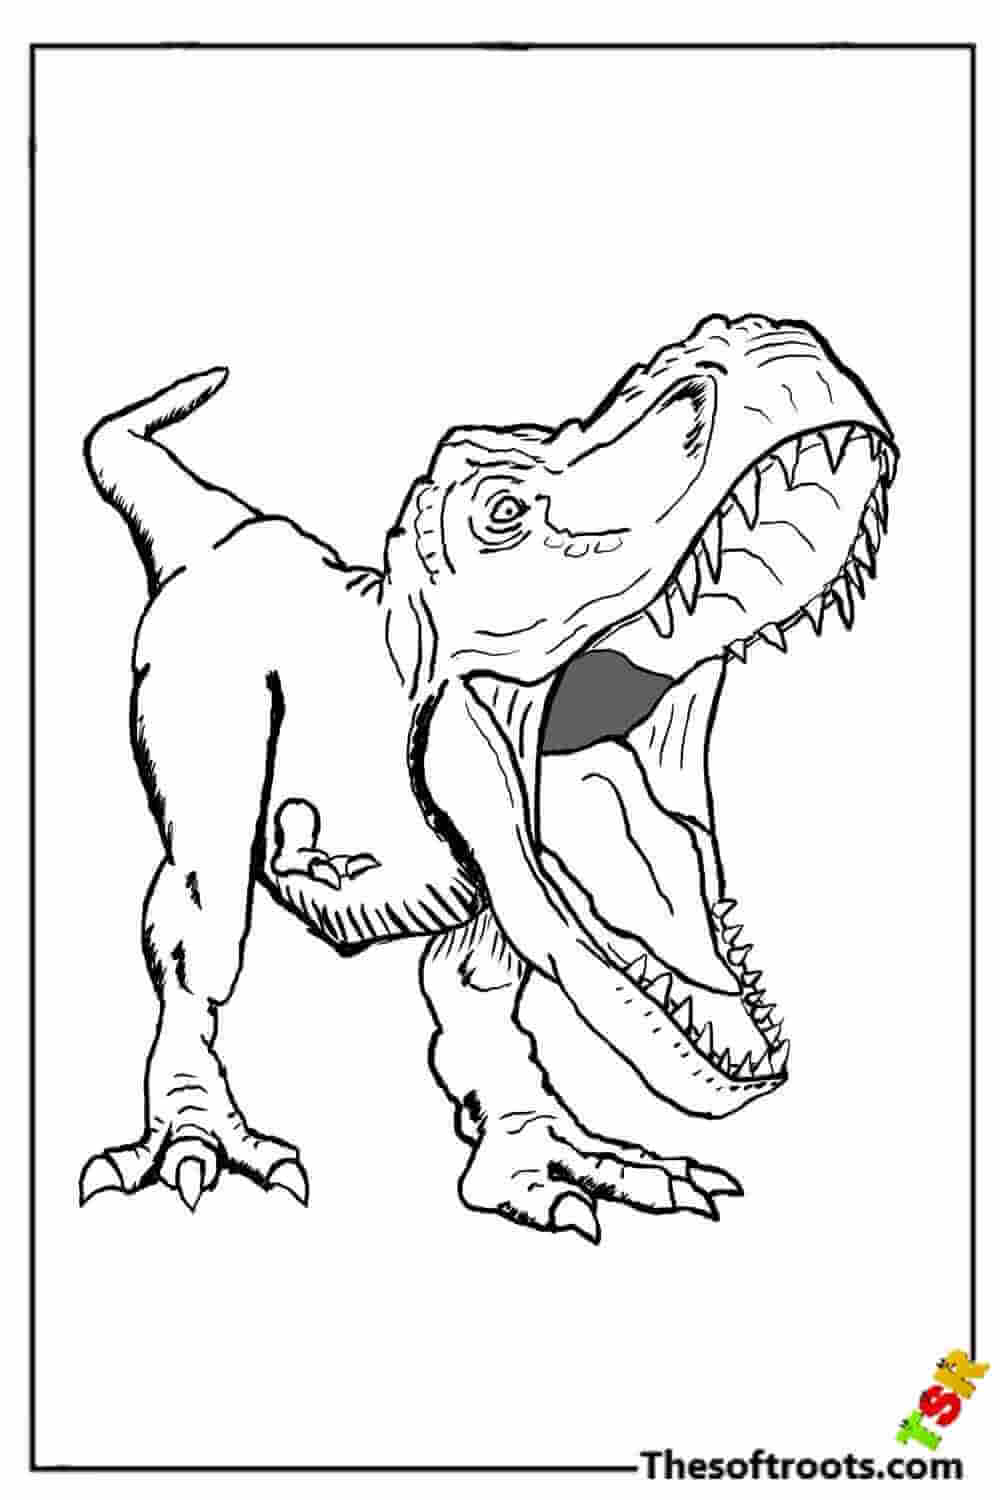 Angry T-Rex coloring pages